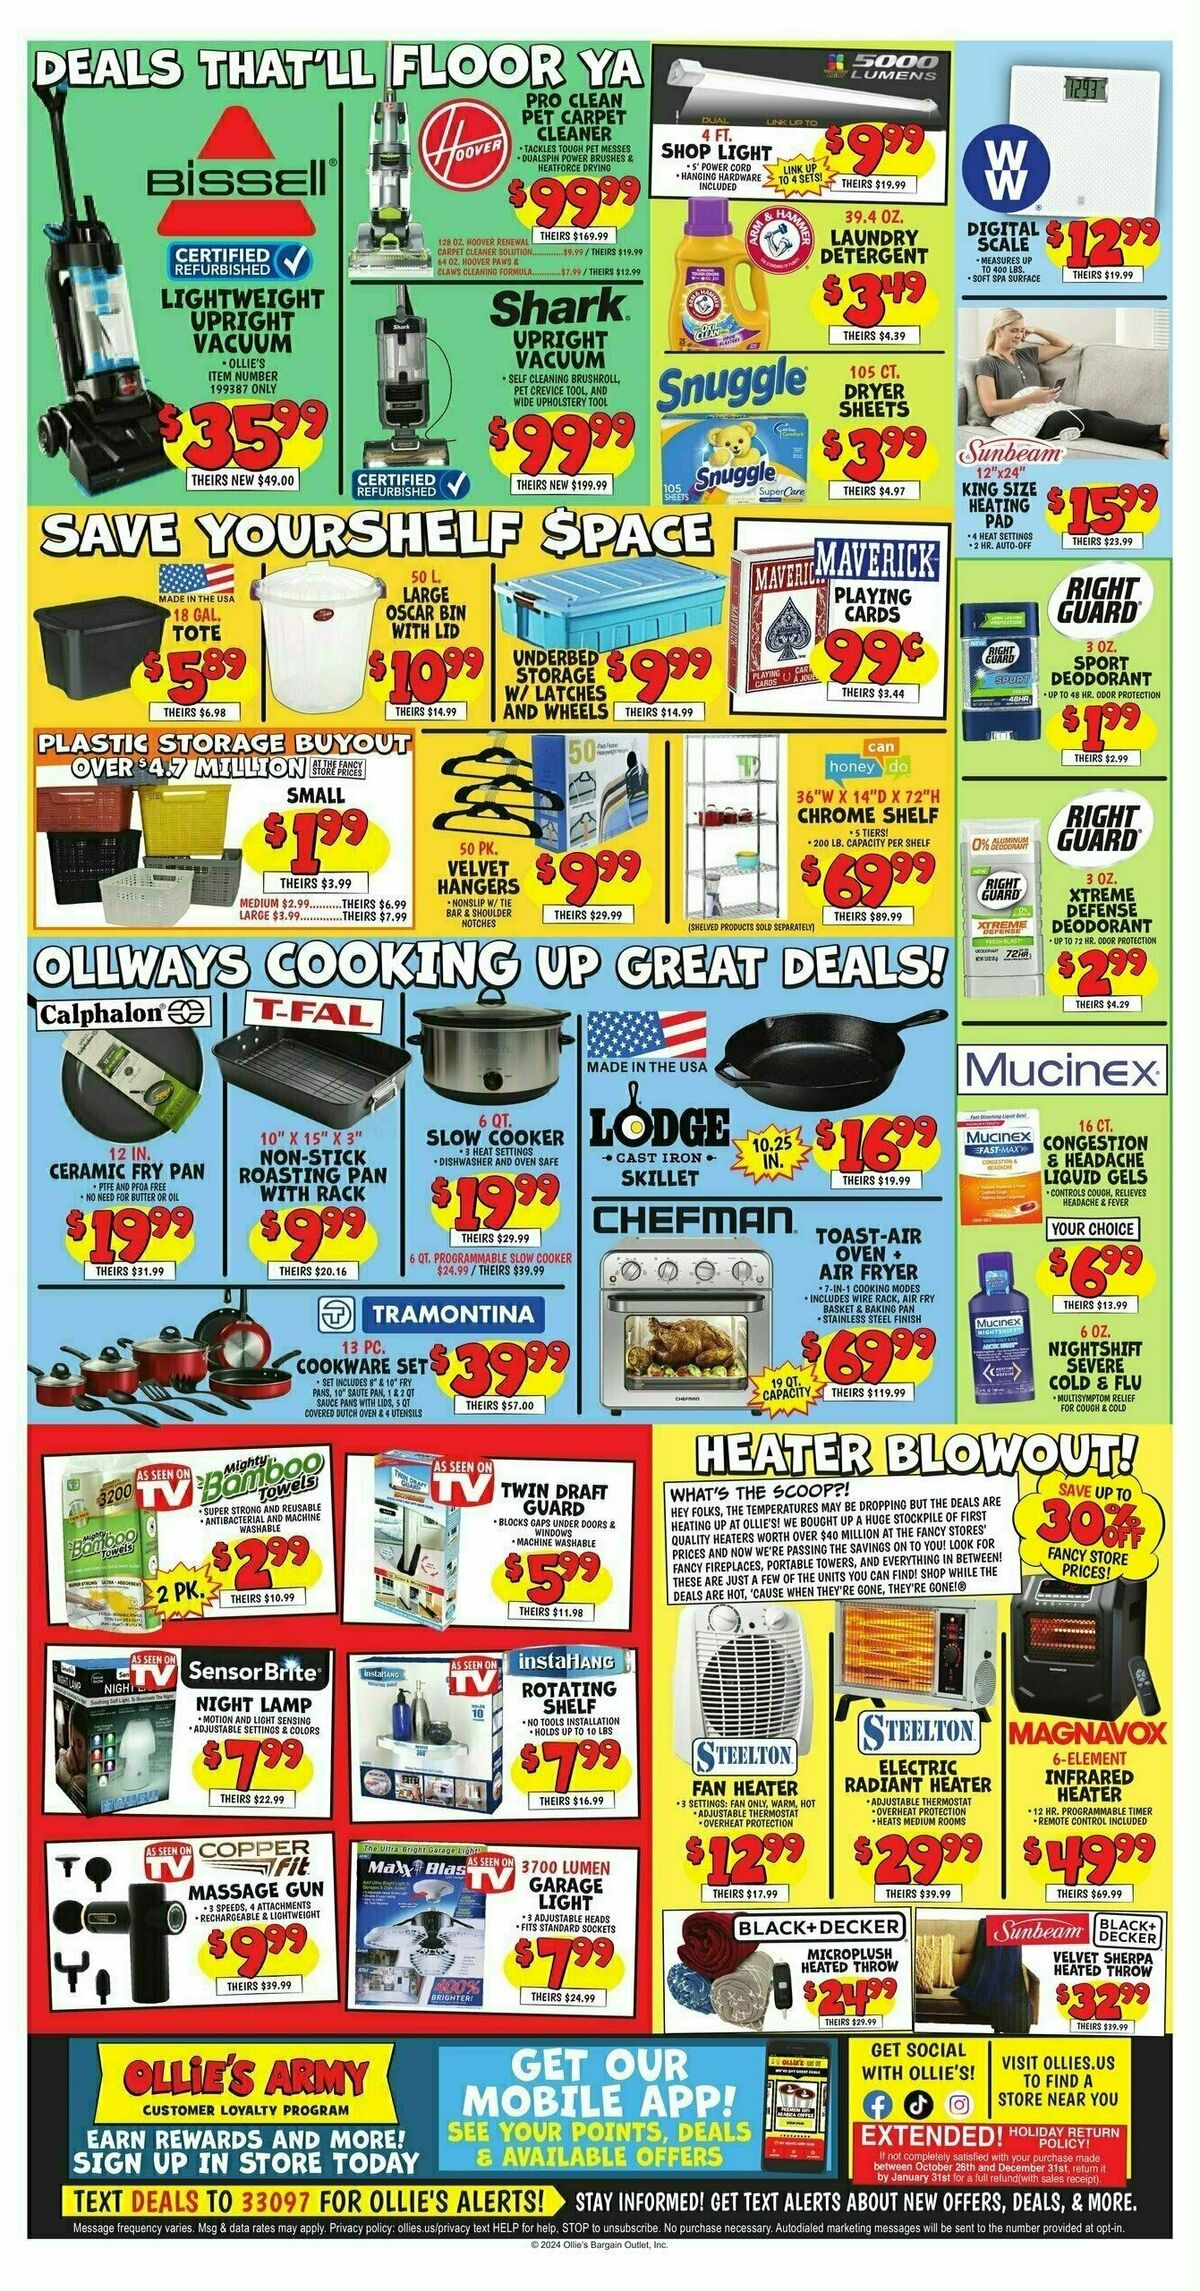 Ollie's Bargain Outlet Weekly Ad from January 10